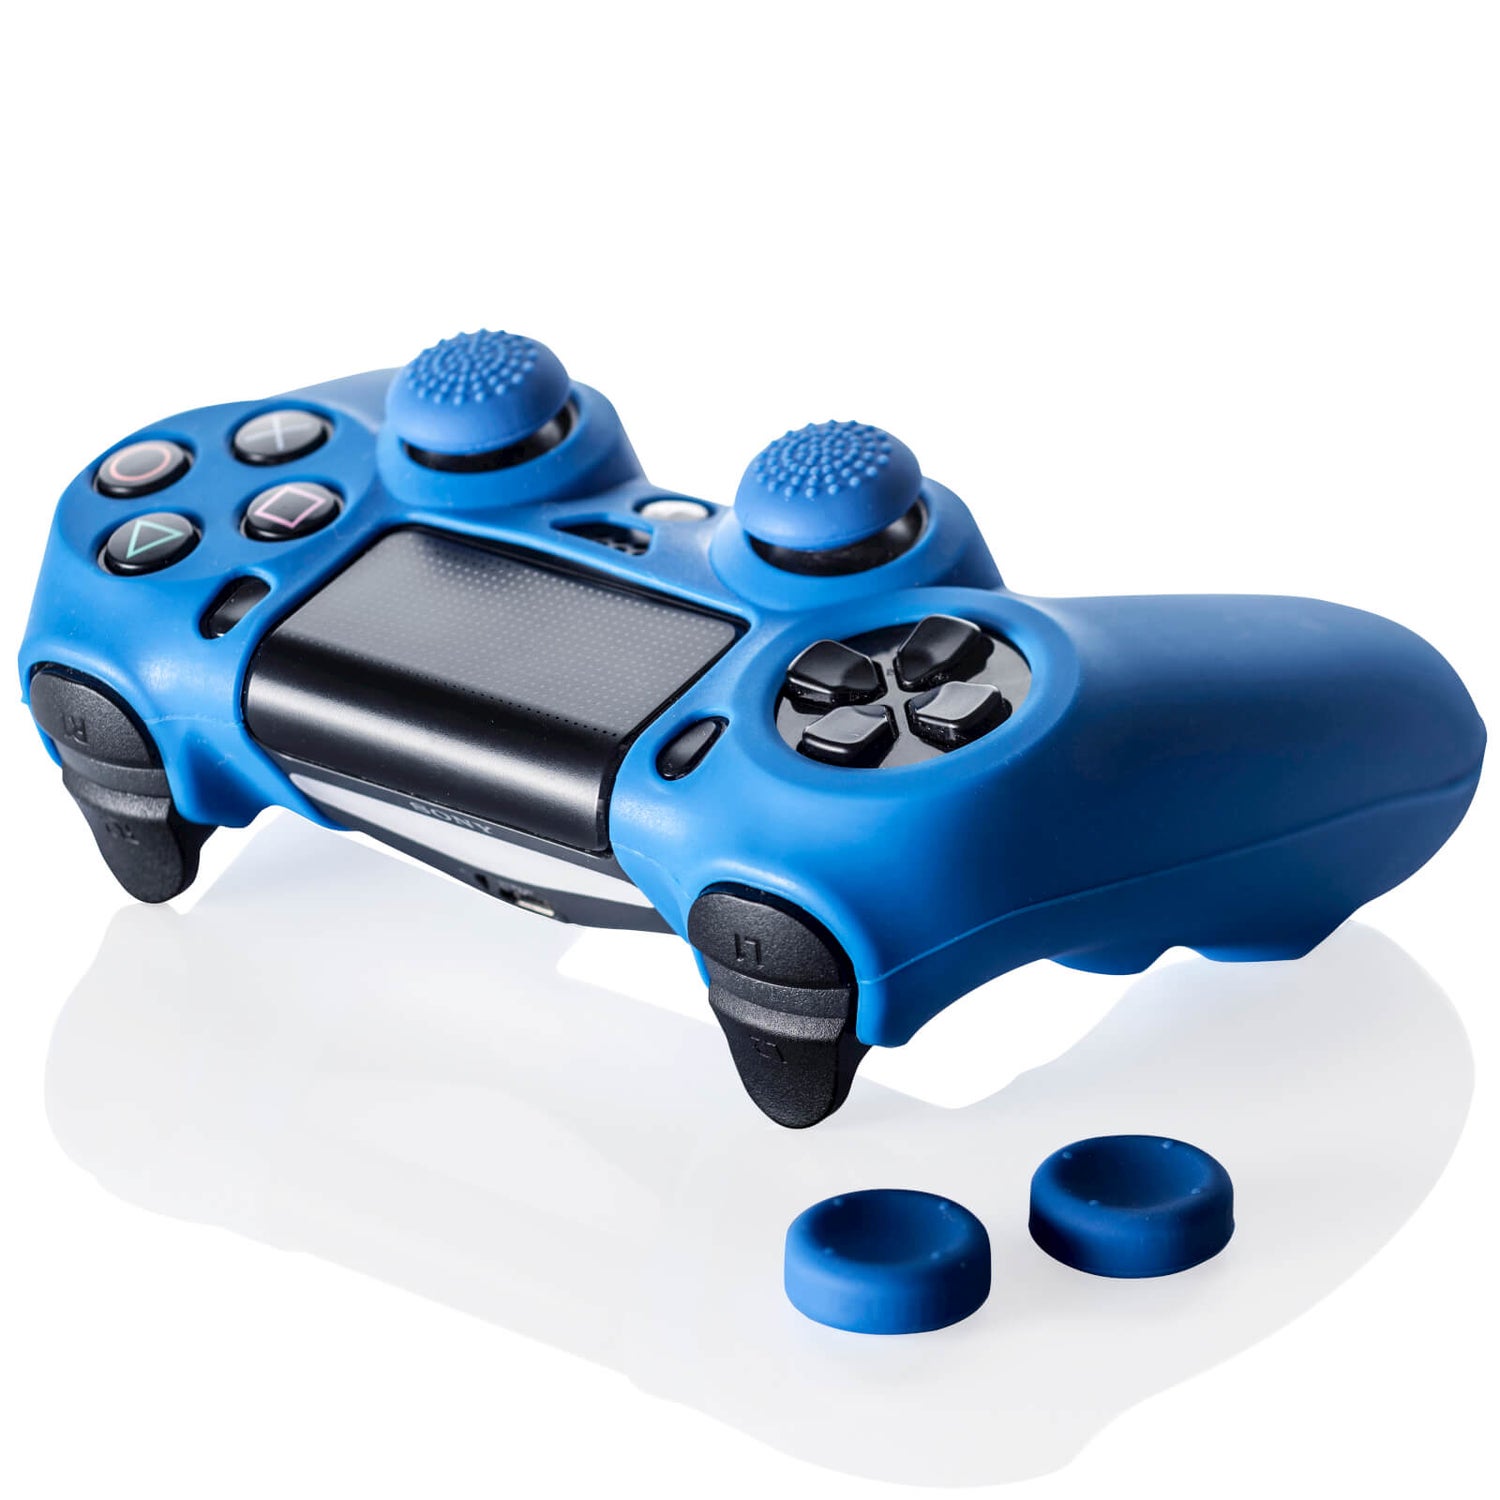 Tilmeld At opdage Reduktion Prif Controller Kit Includes Skin and Thumb Grips (PS4) Games Accessories -  Zavvi (日本)